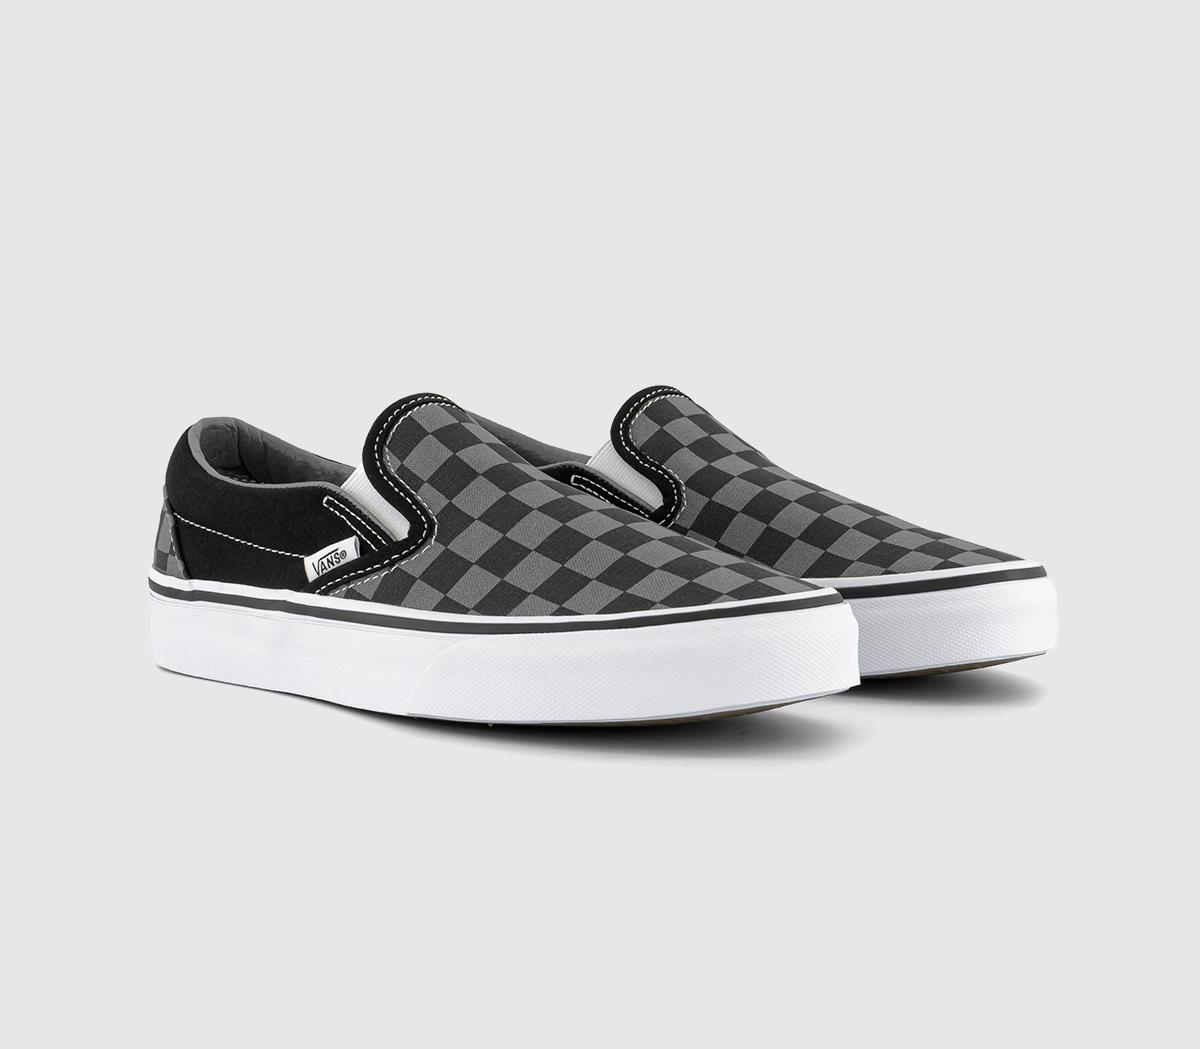 Vans Classic Slip On Trainers Black Pewter Check Canvas In Black / Grey, 4.5